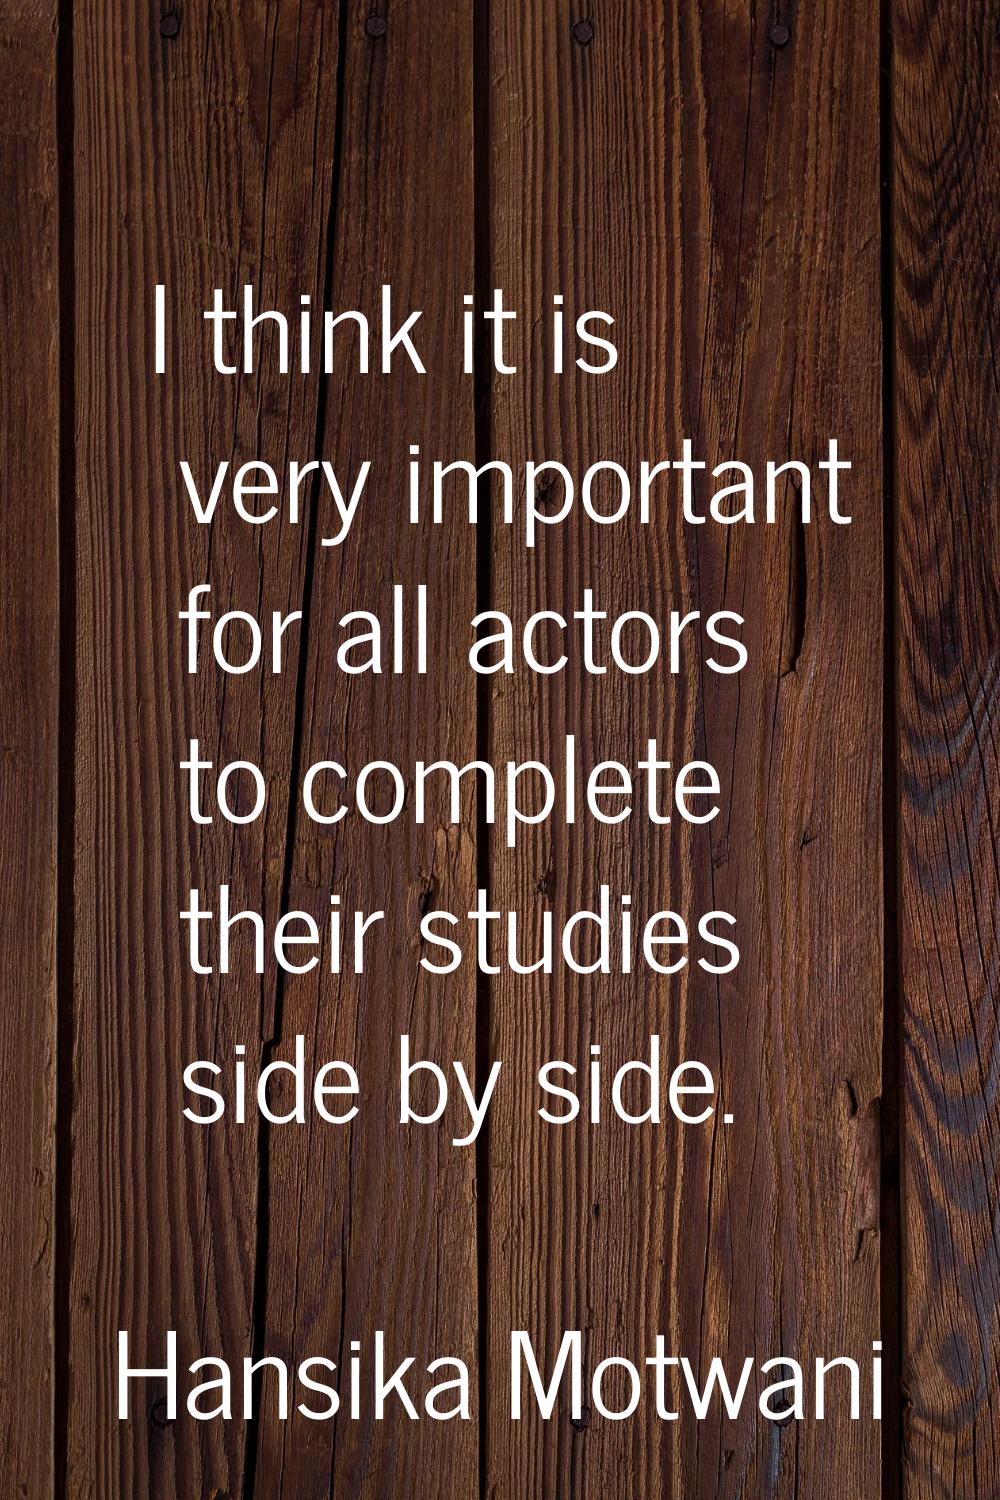 I think it is very important for all actors to complete their studies side by side.